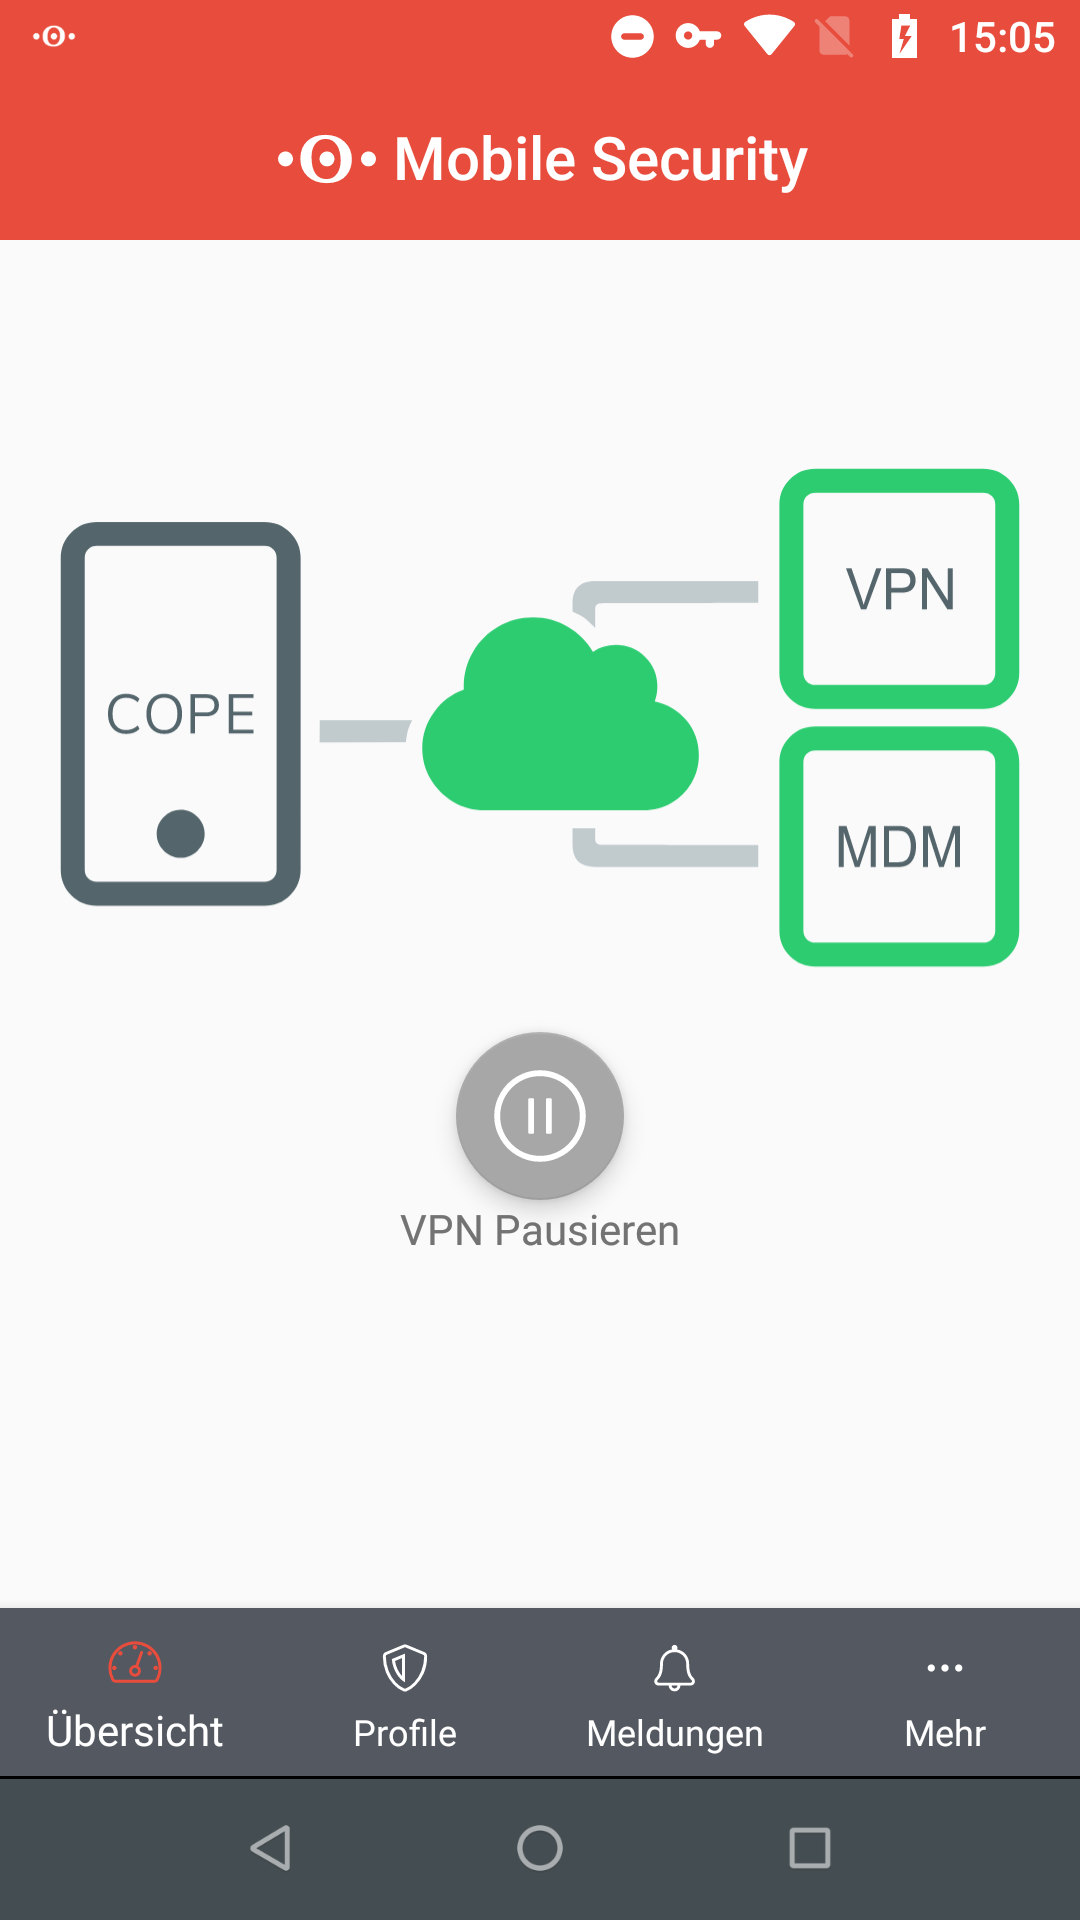 MS Android v1-3-0 MDM und VPN.png